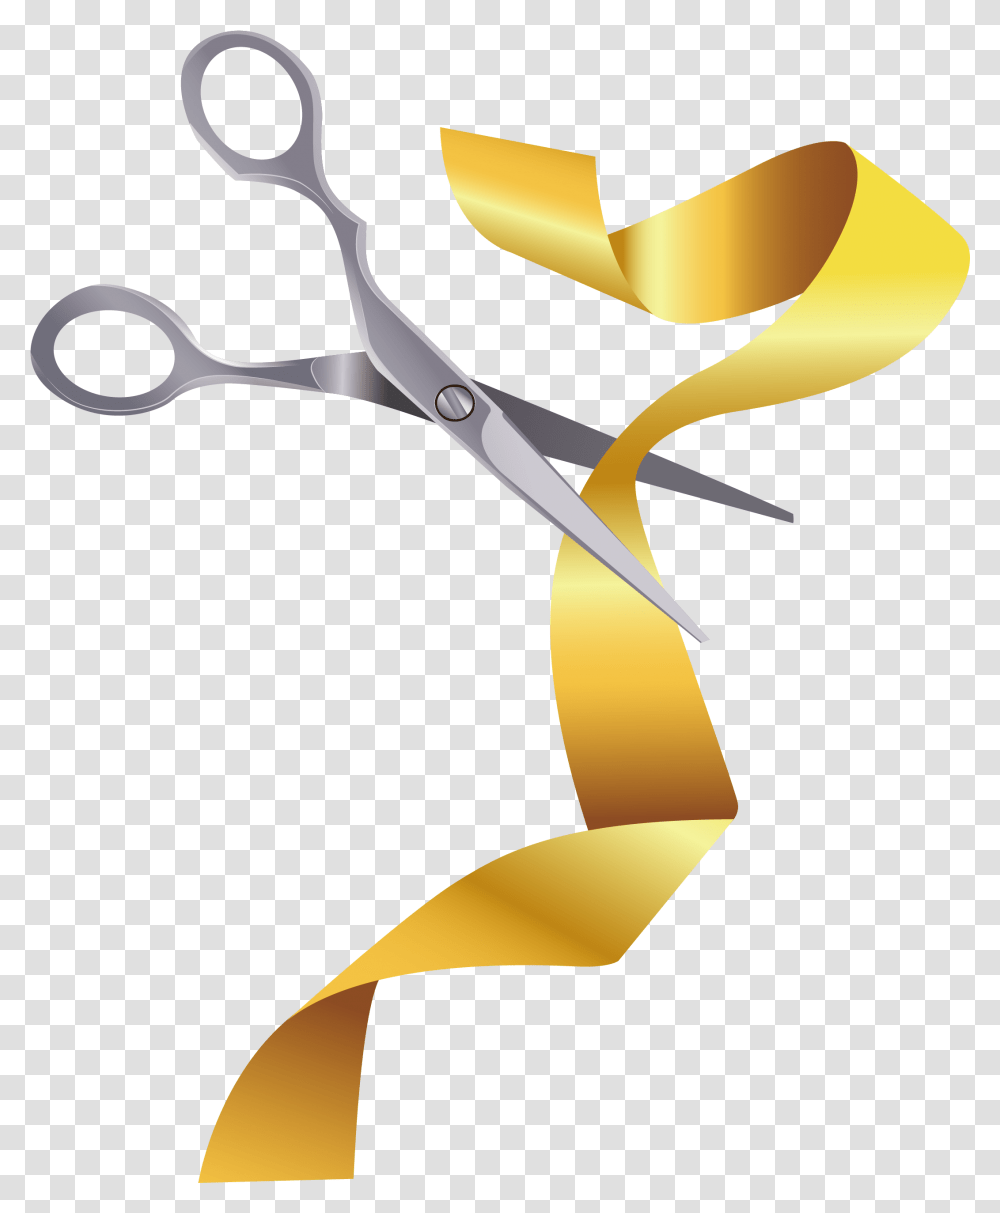 Sissors Golden Ribbon Transprent Golden Ribbon With Golden Ribbon Cutting, Weapon, Weaponry, Blade, Scissors Transparent Png